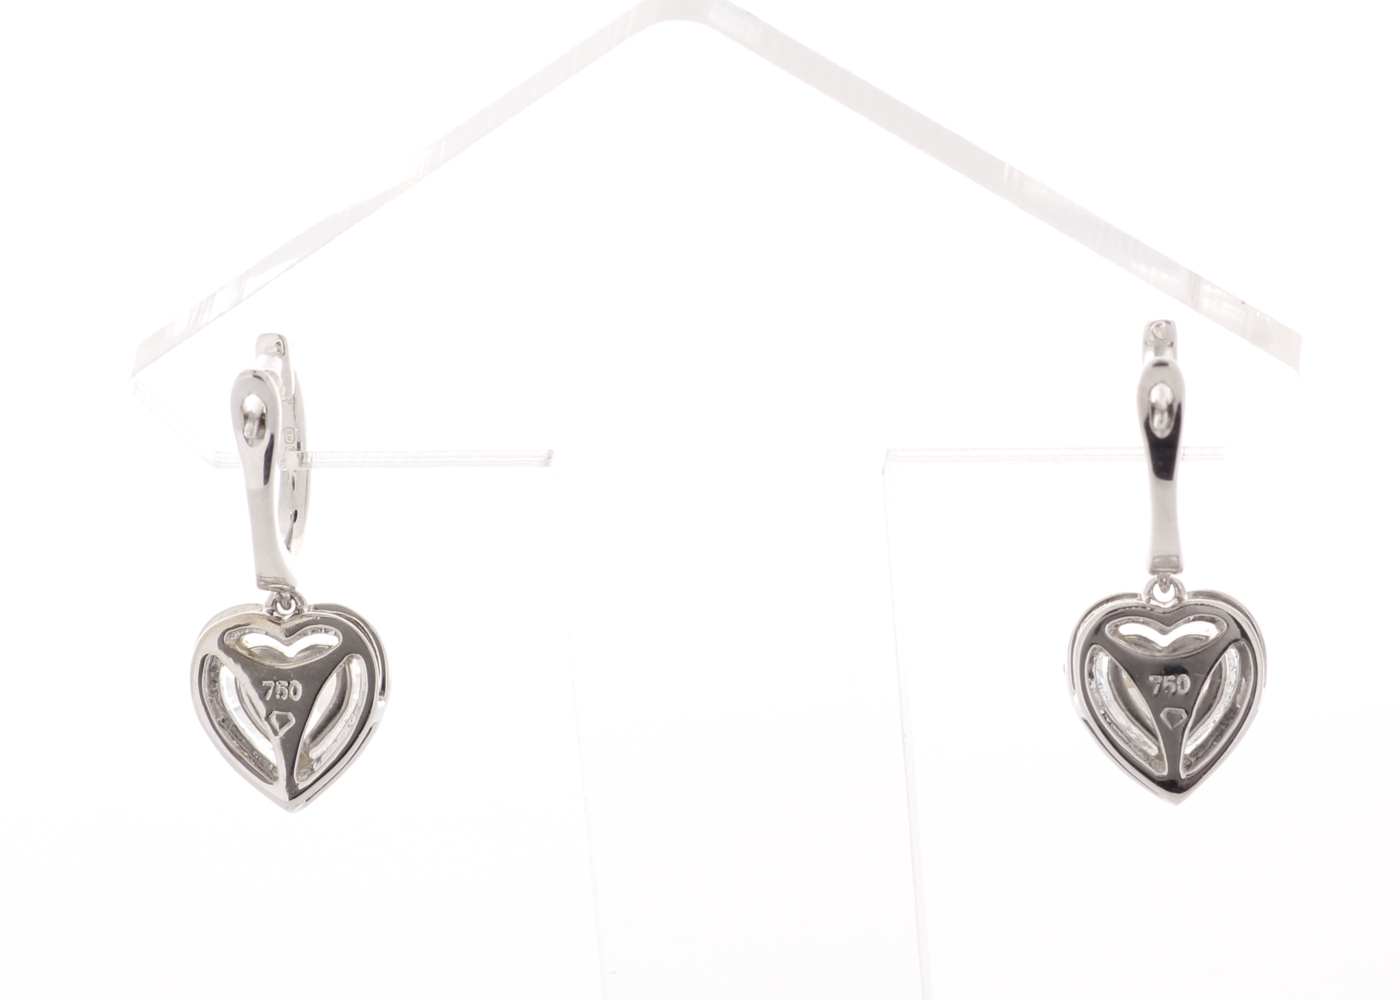 18ct White Gold Heart Shape Halo Drop Earring 1.74 Carats - Image 4 of 4